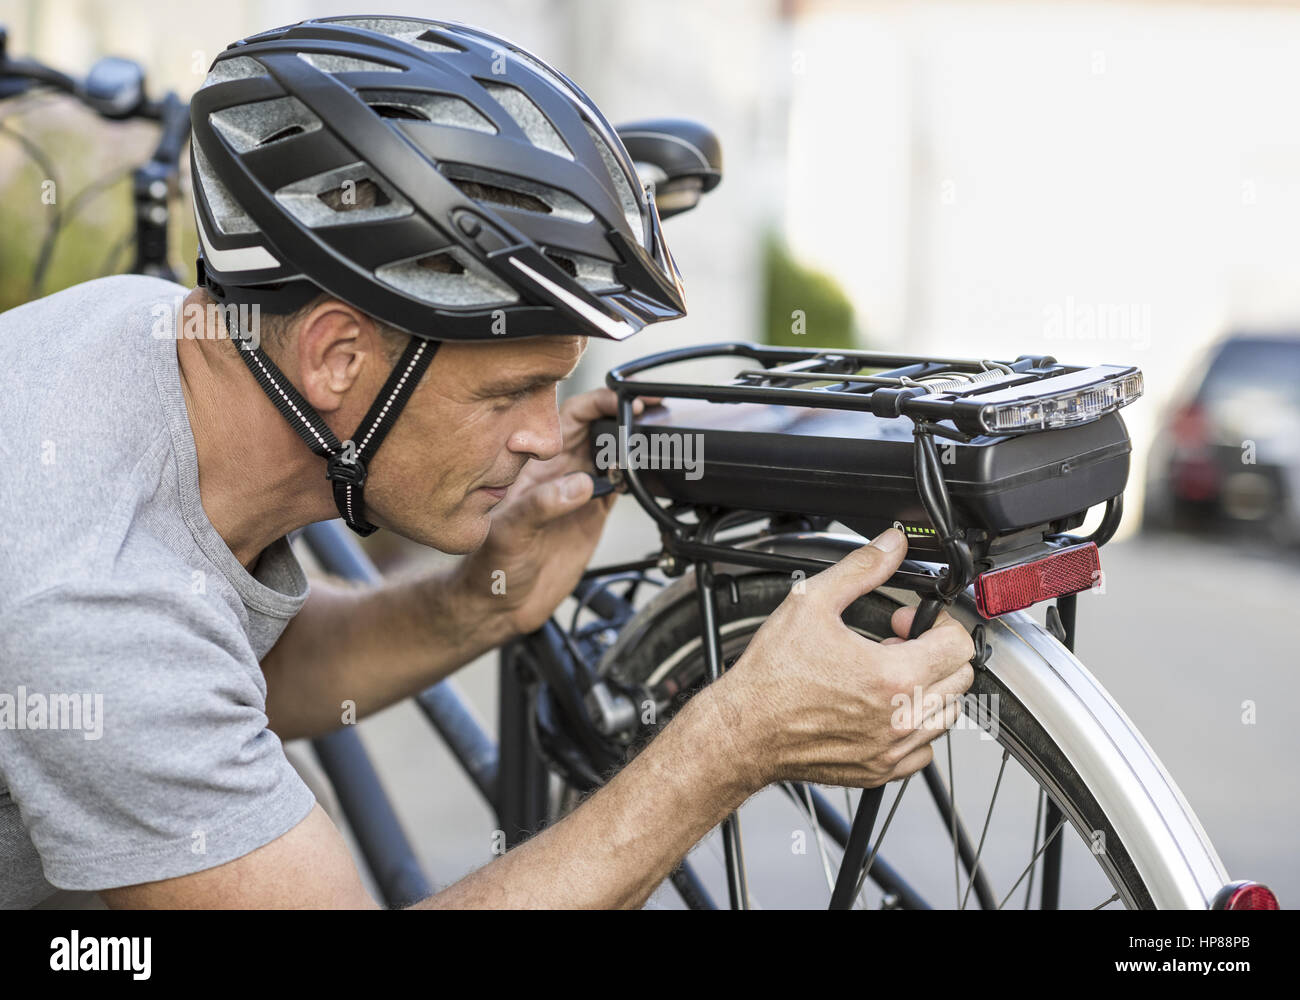 Fahrradhelm High Resolution Stock Photography and Images - Alamy